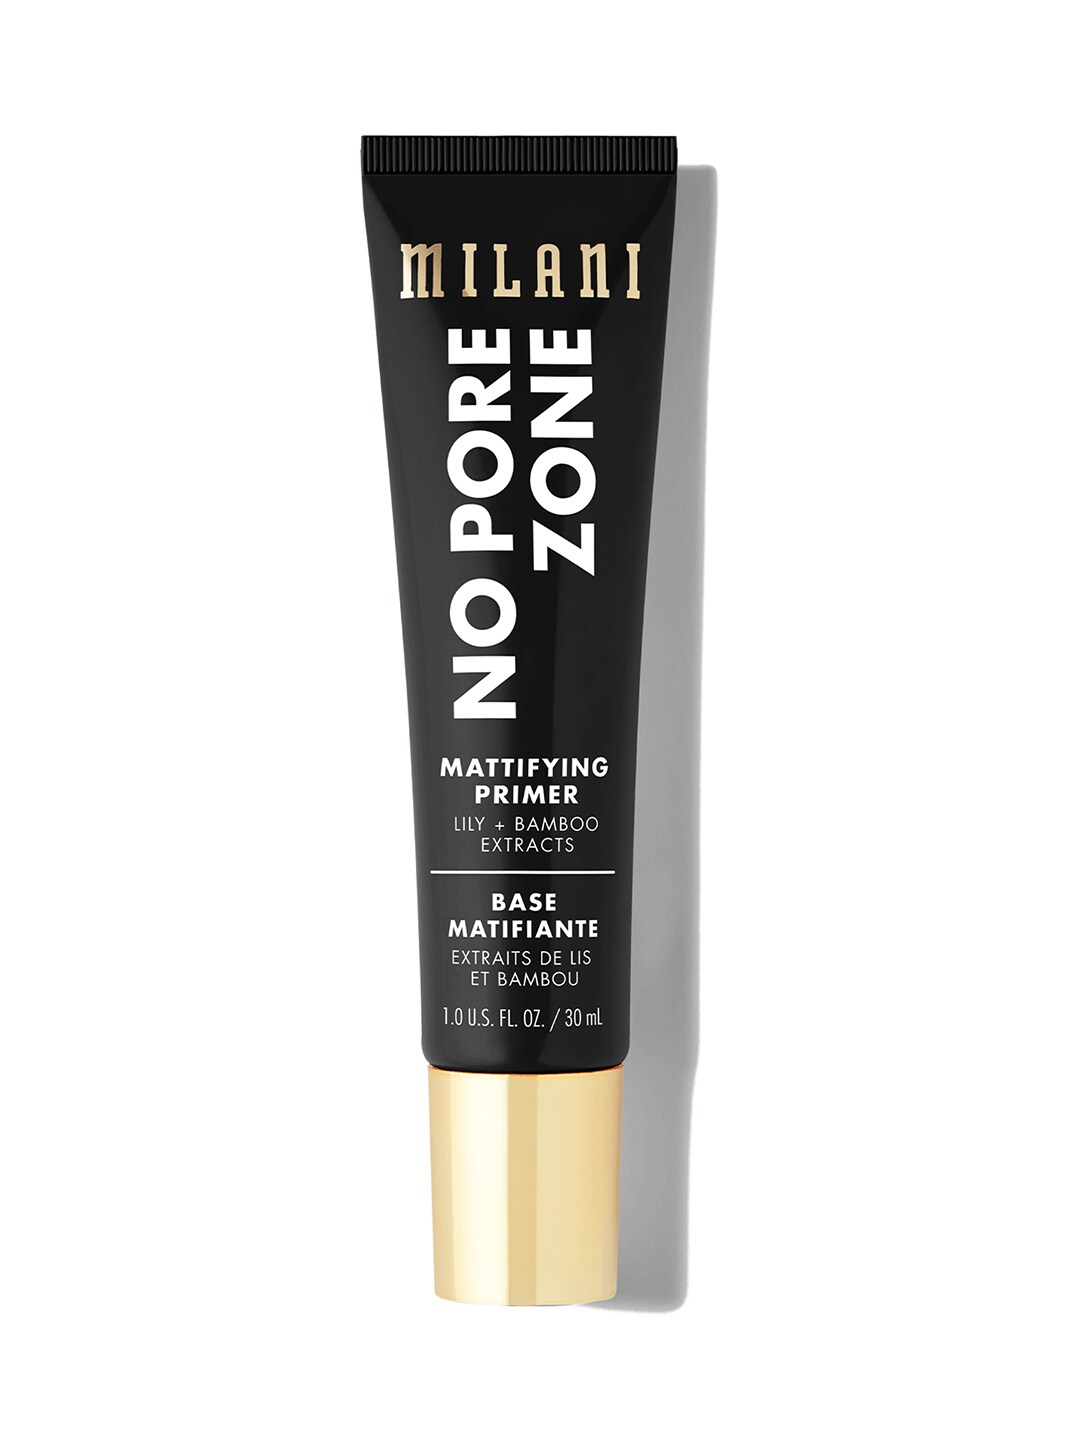 MILANI No Pore Zone Mattifyng Face Primer with Lily & Bamboo Extracts Price in India